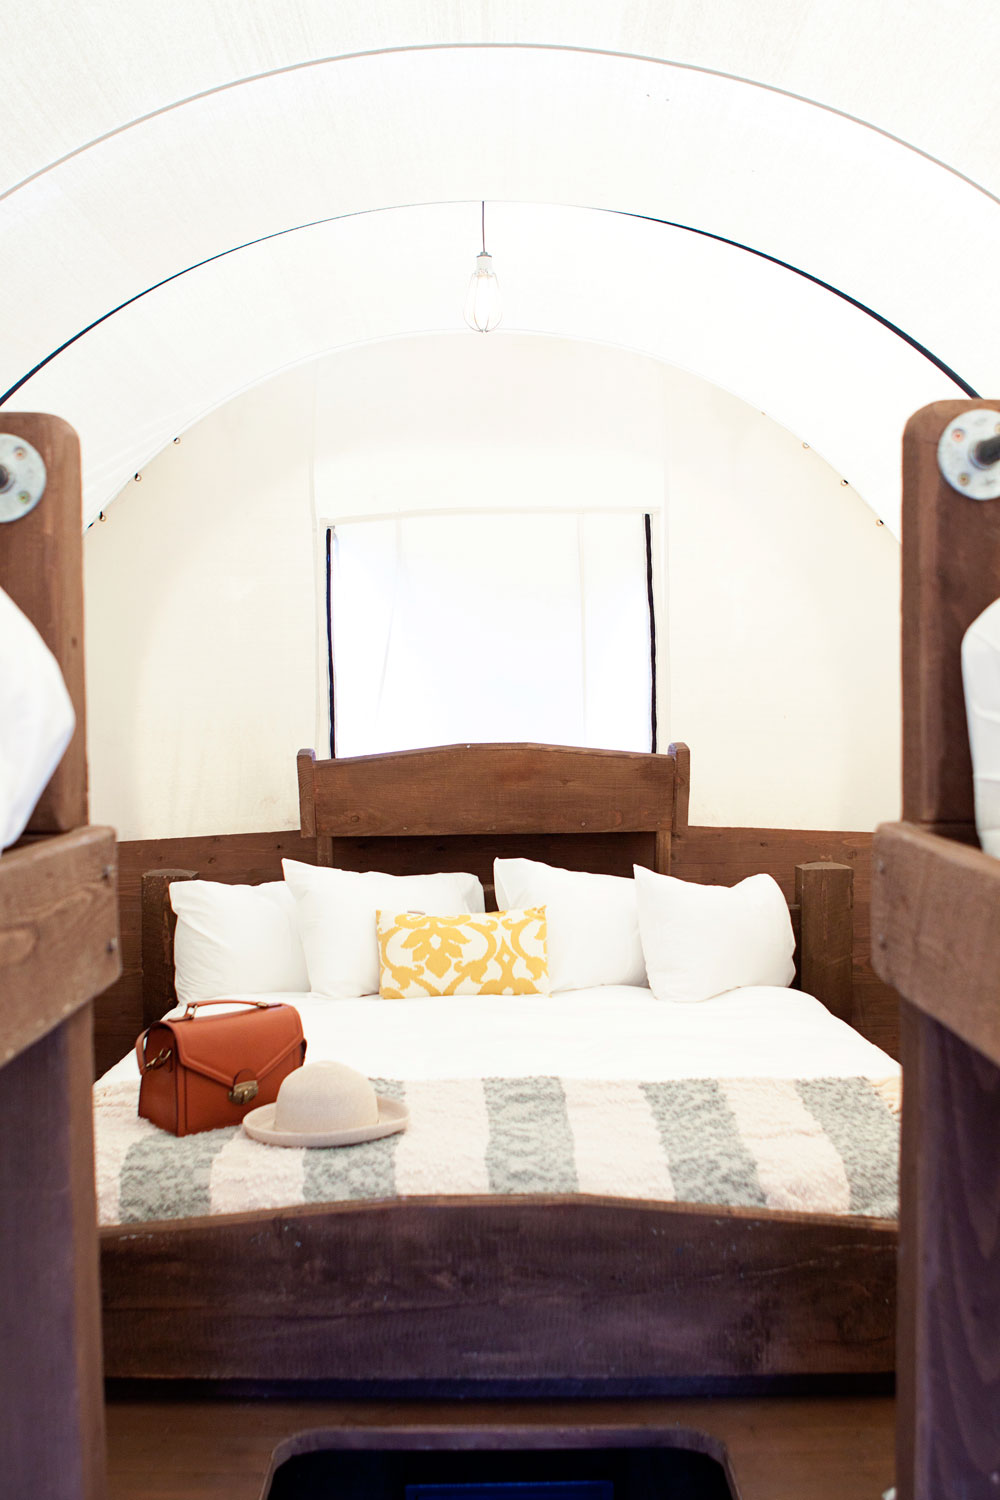 Inside of a Glamping Covered Wagon at Conestoga Ranch